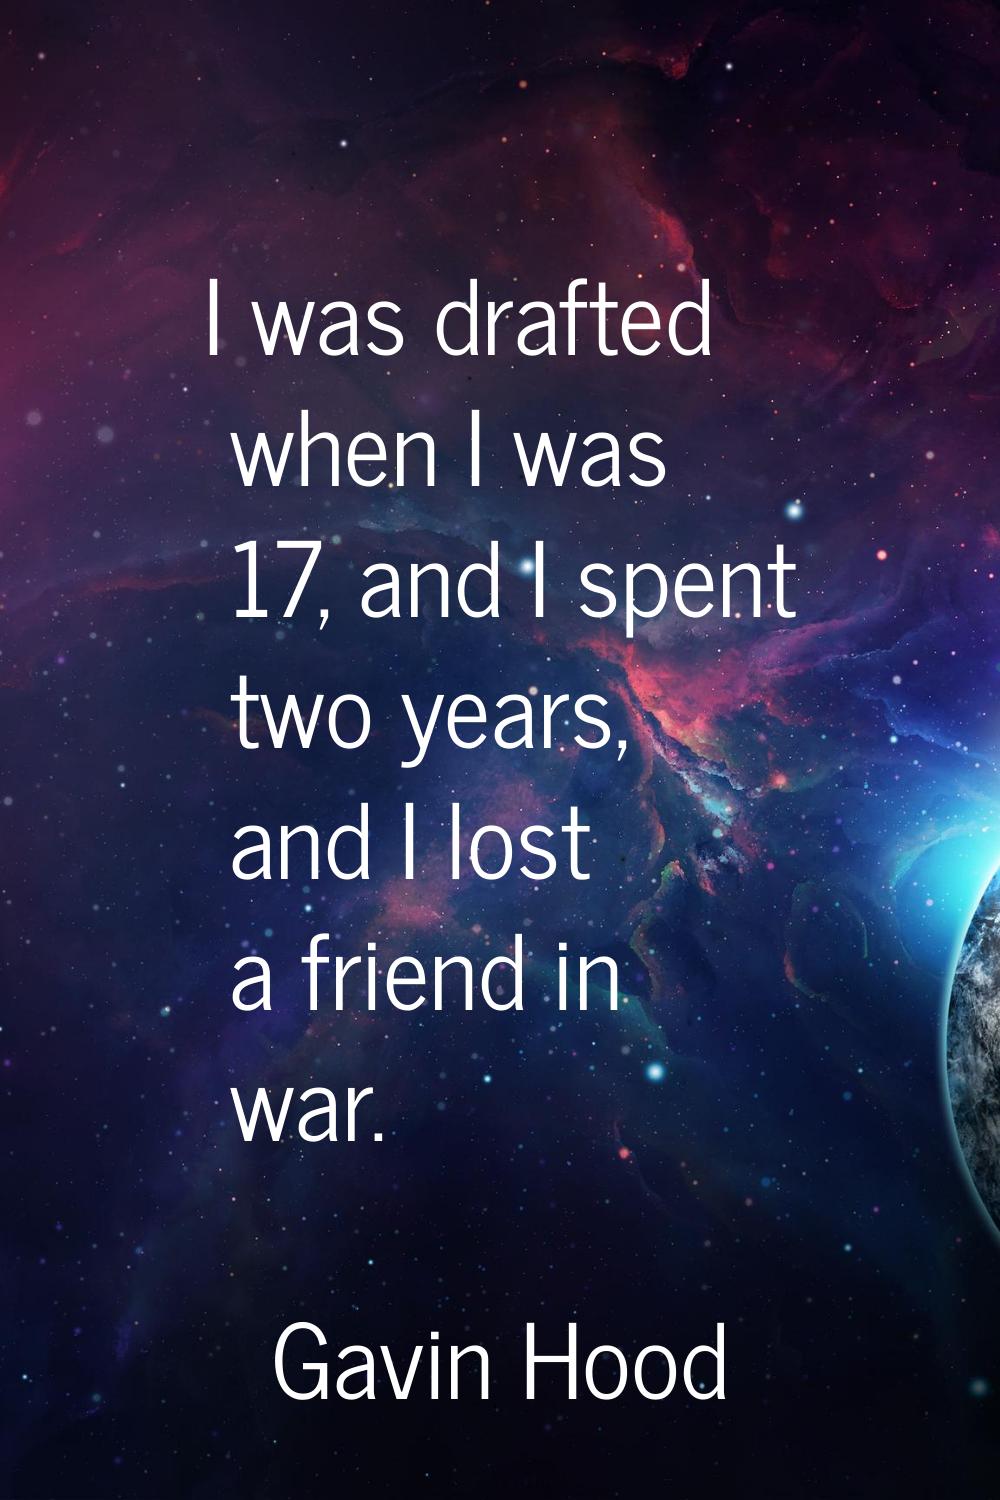 I was drafted when I was 17, and I spent two years, and I lost a friend in war.